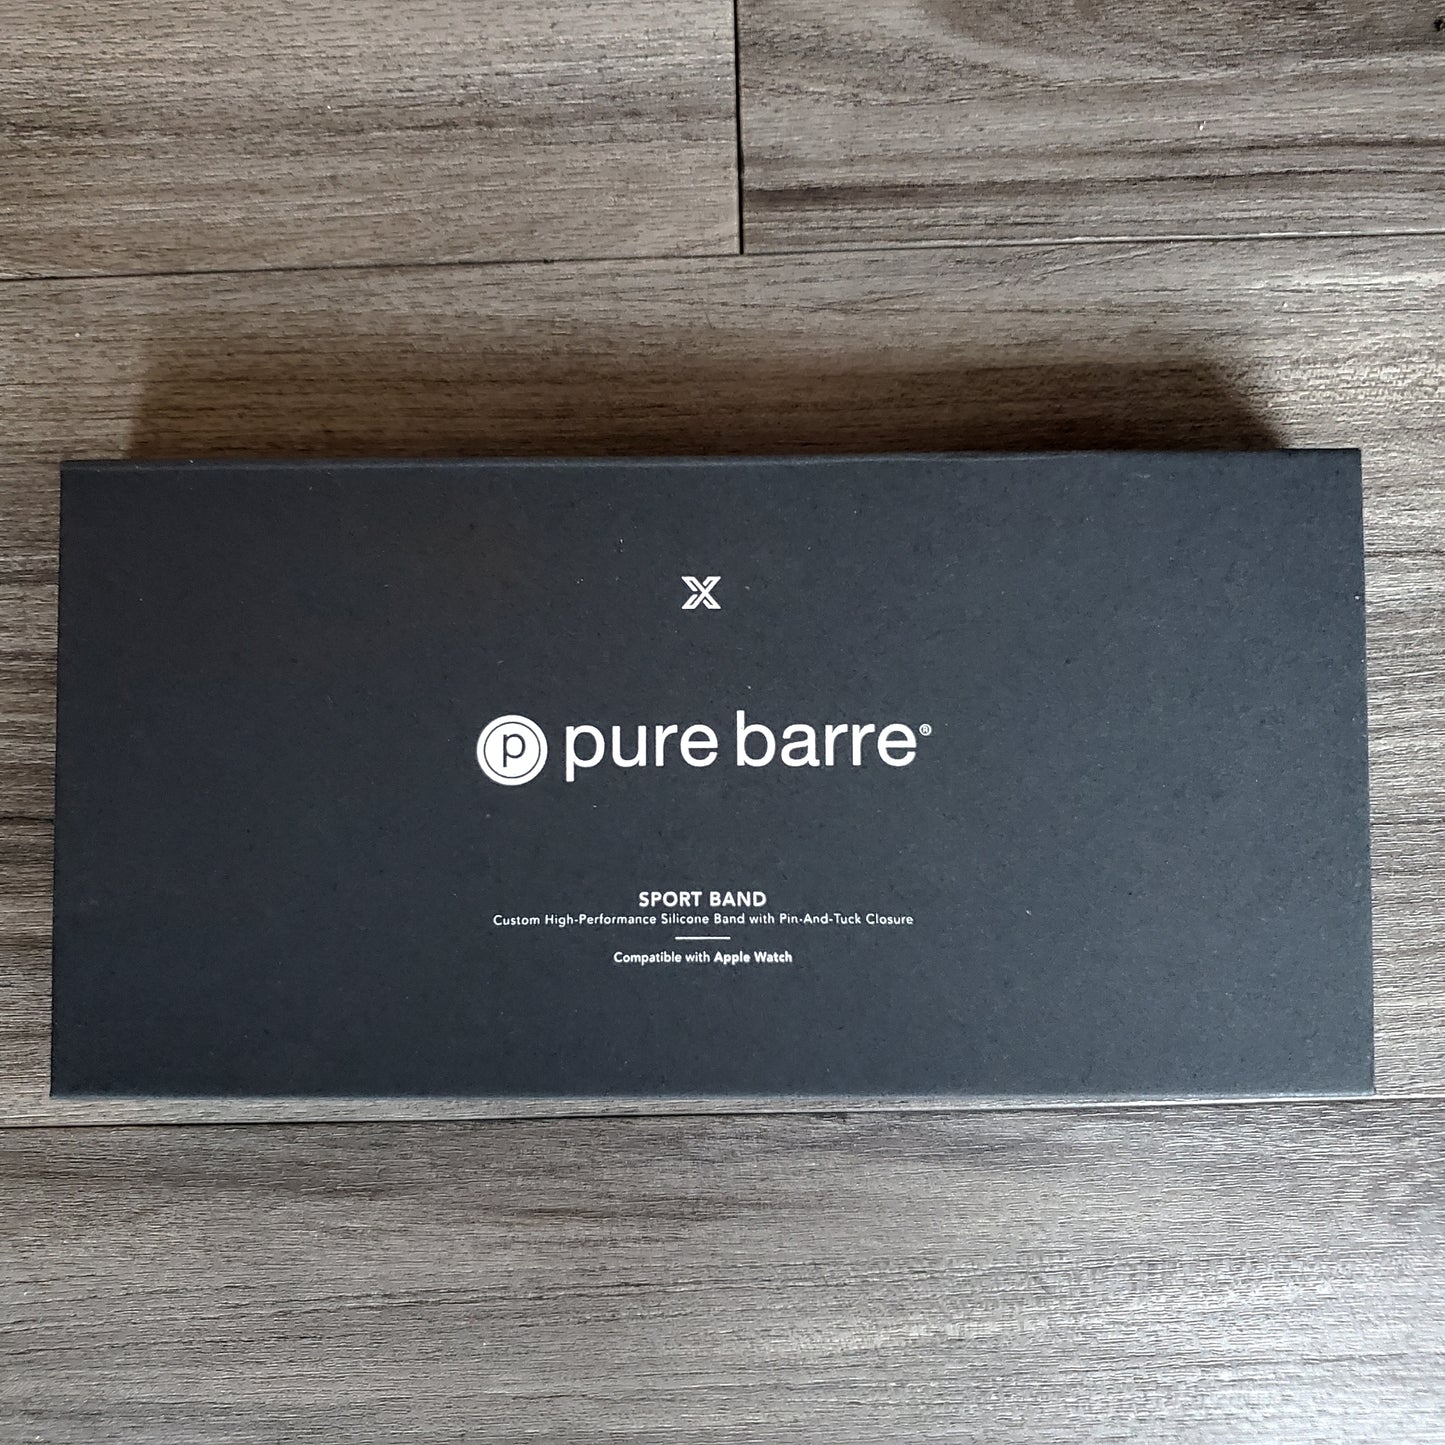 Pure Barre Apple Watch Fitness Band